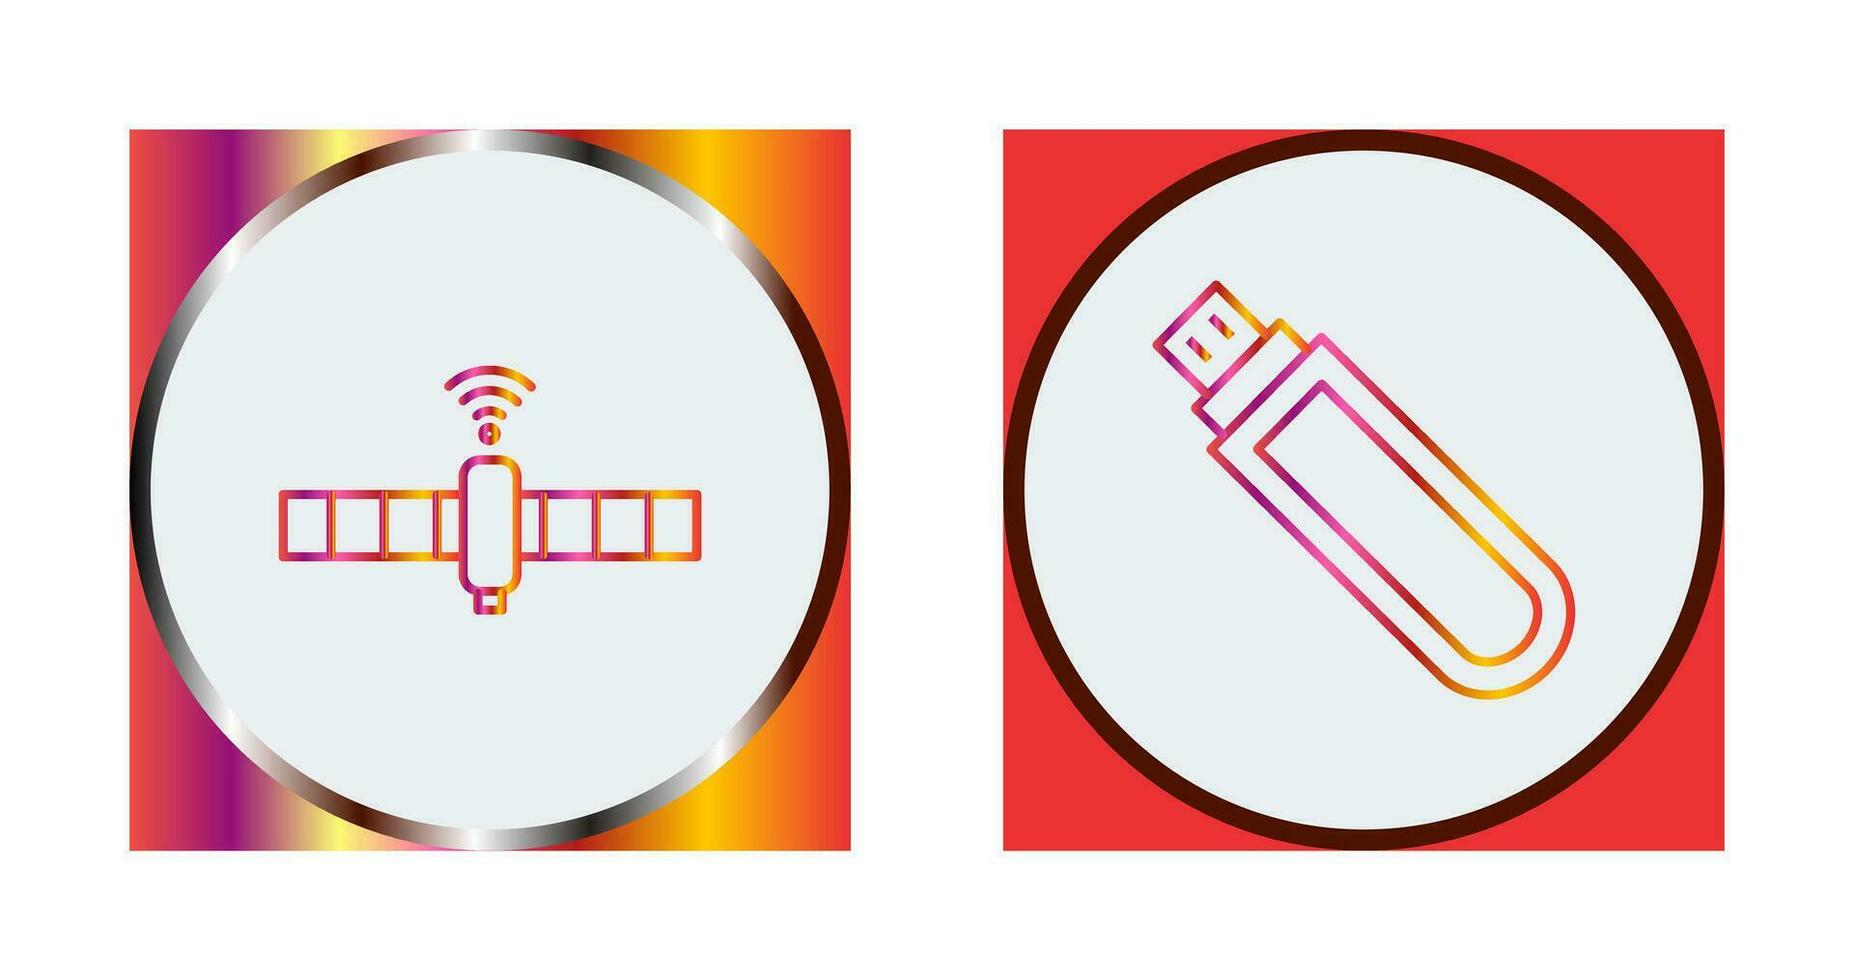 satelllite and usb drive Icon vector